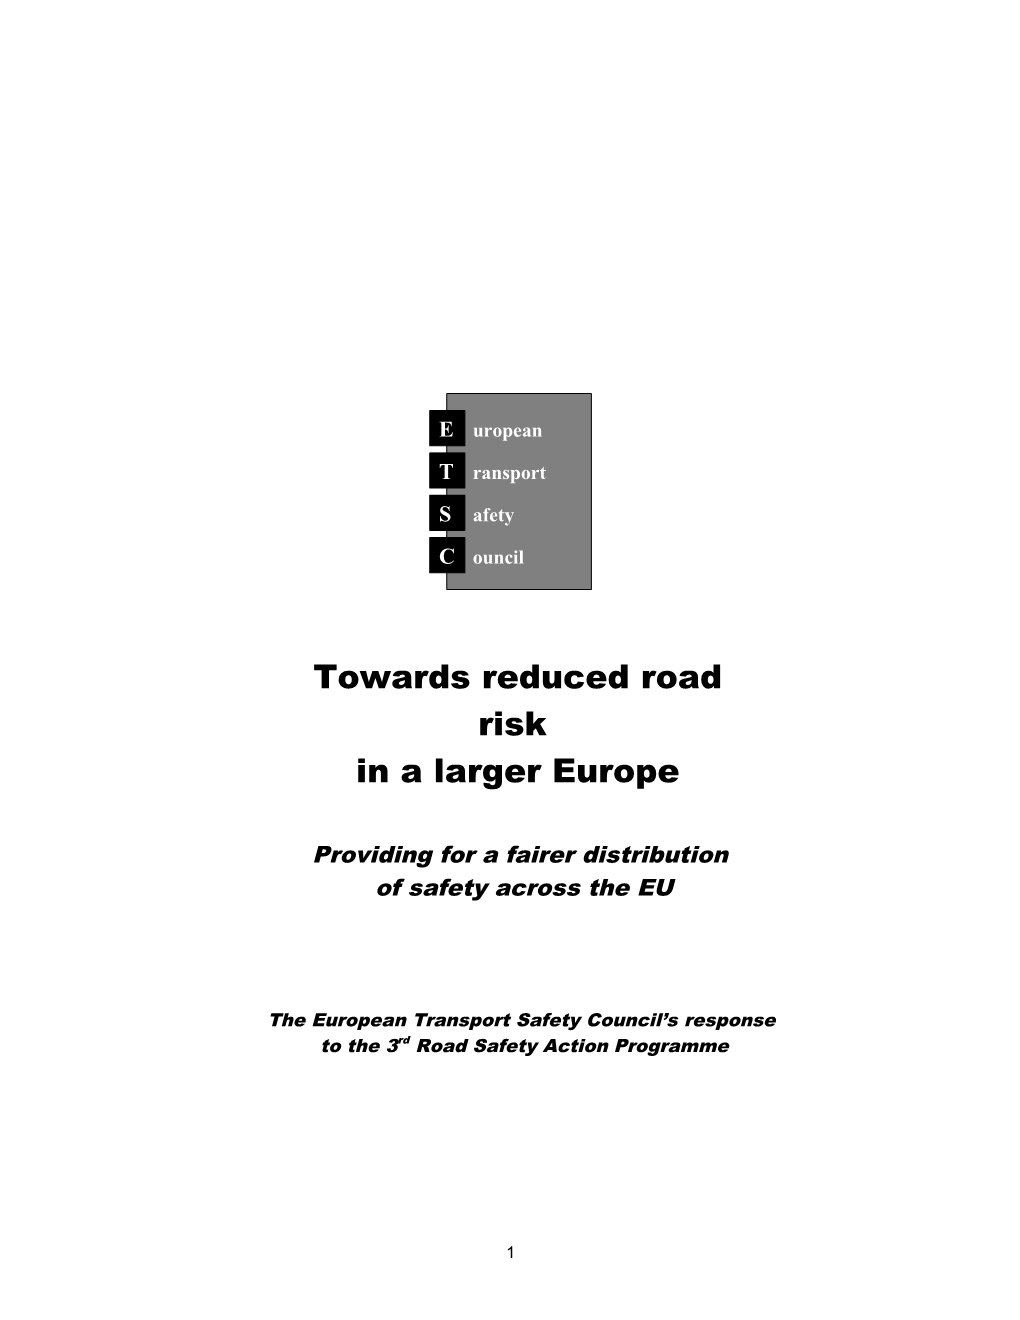 Etscs Initial Response to the 3Rd Road Safety Action Plan